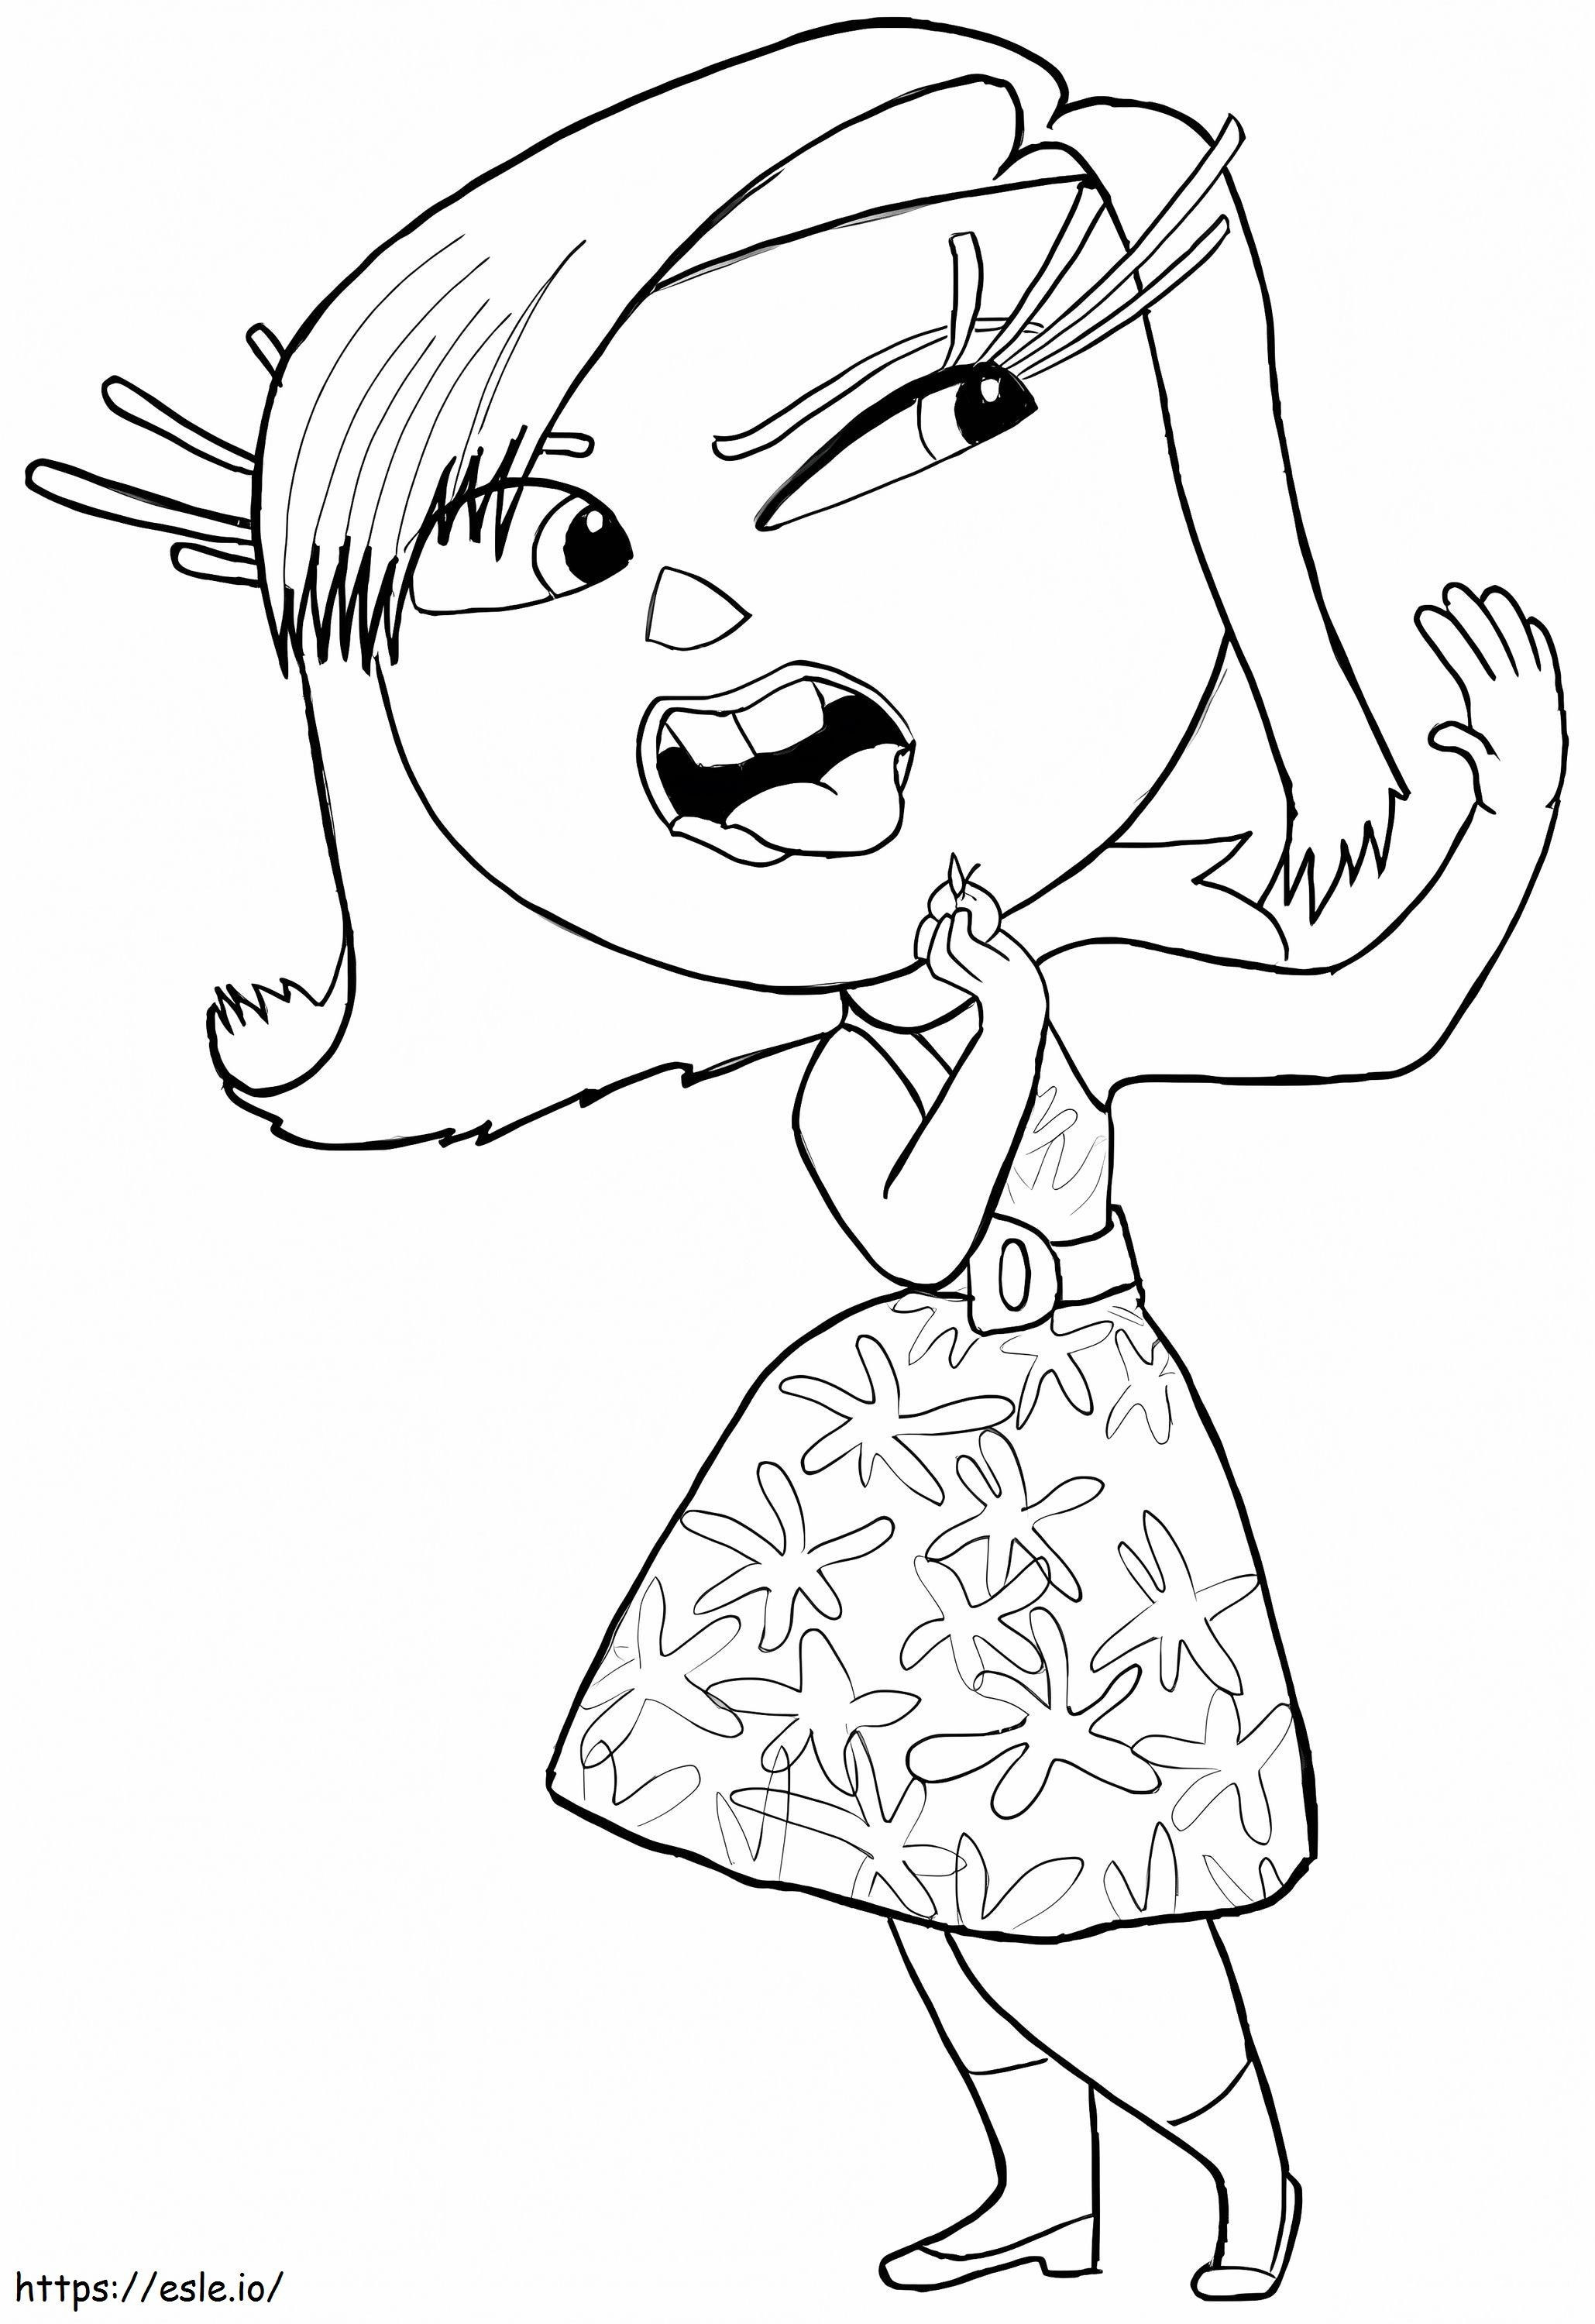 Disgust From The Inside Out coloring page